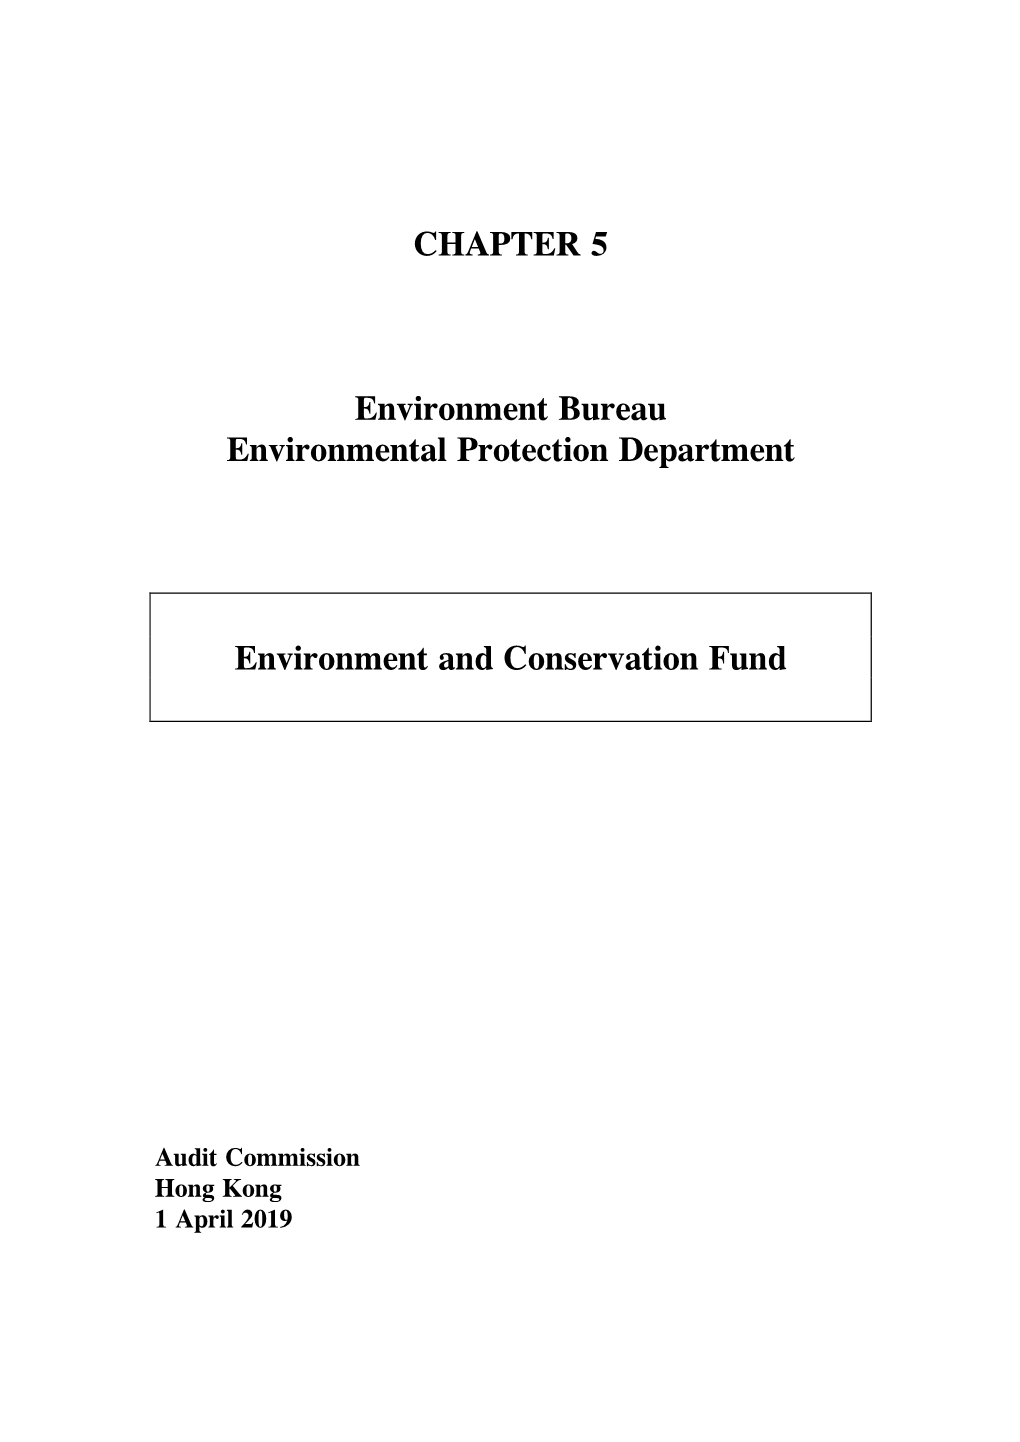 CHAPTER 5 Environment Bureau Environmental Protection Department Environment and Conservation Fund